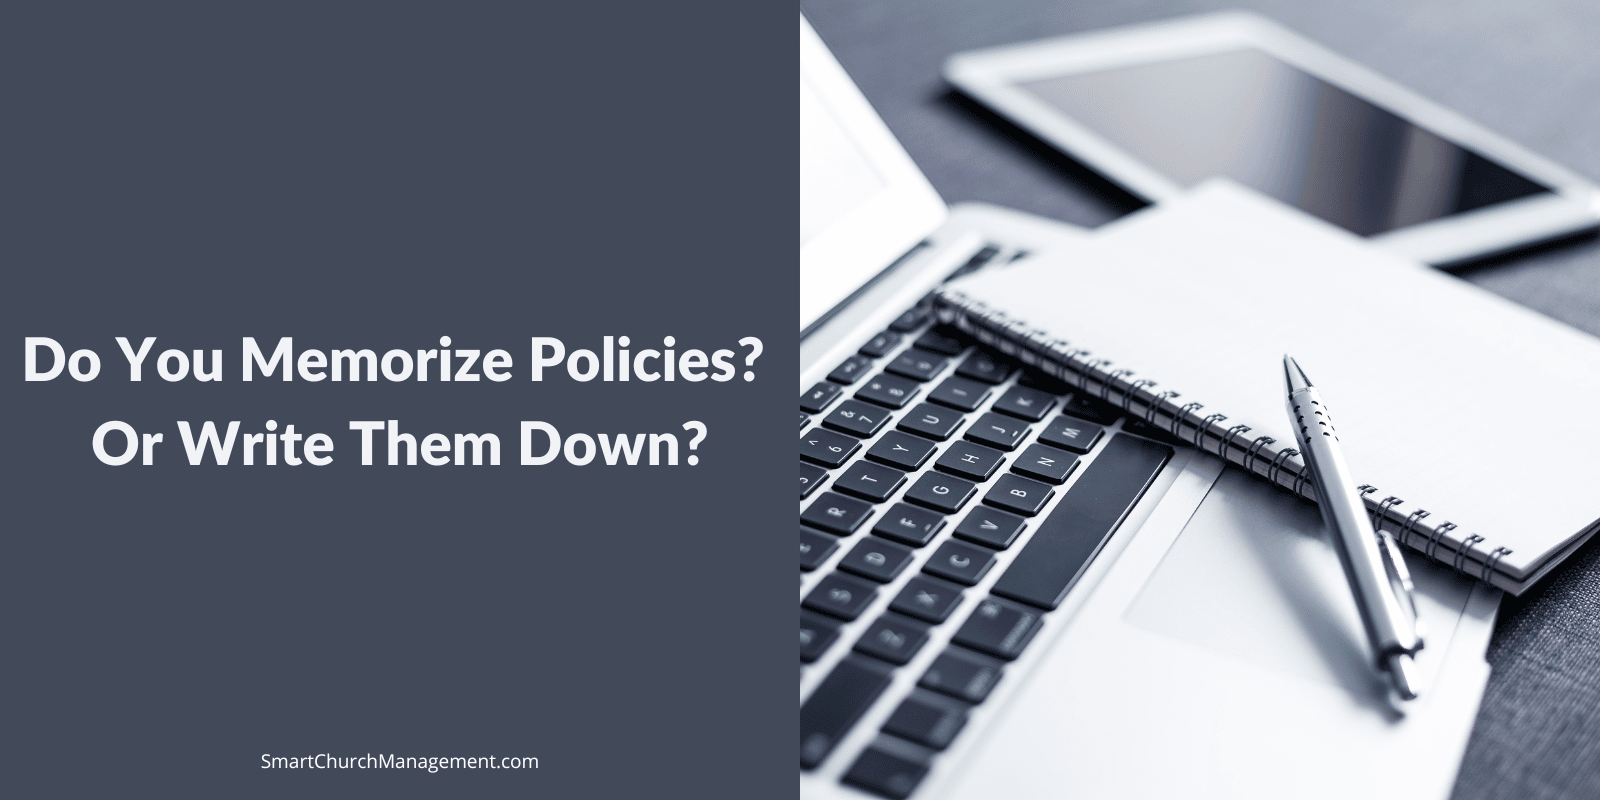 What is the importance in writing down policies and procedures